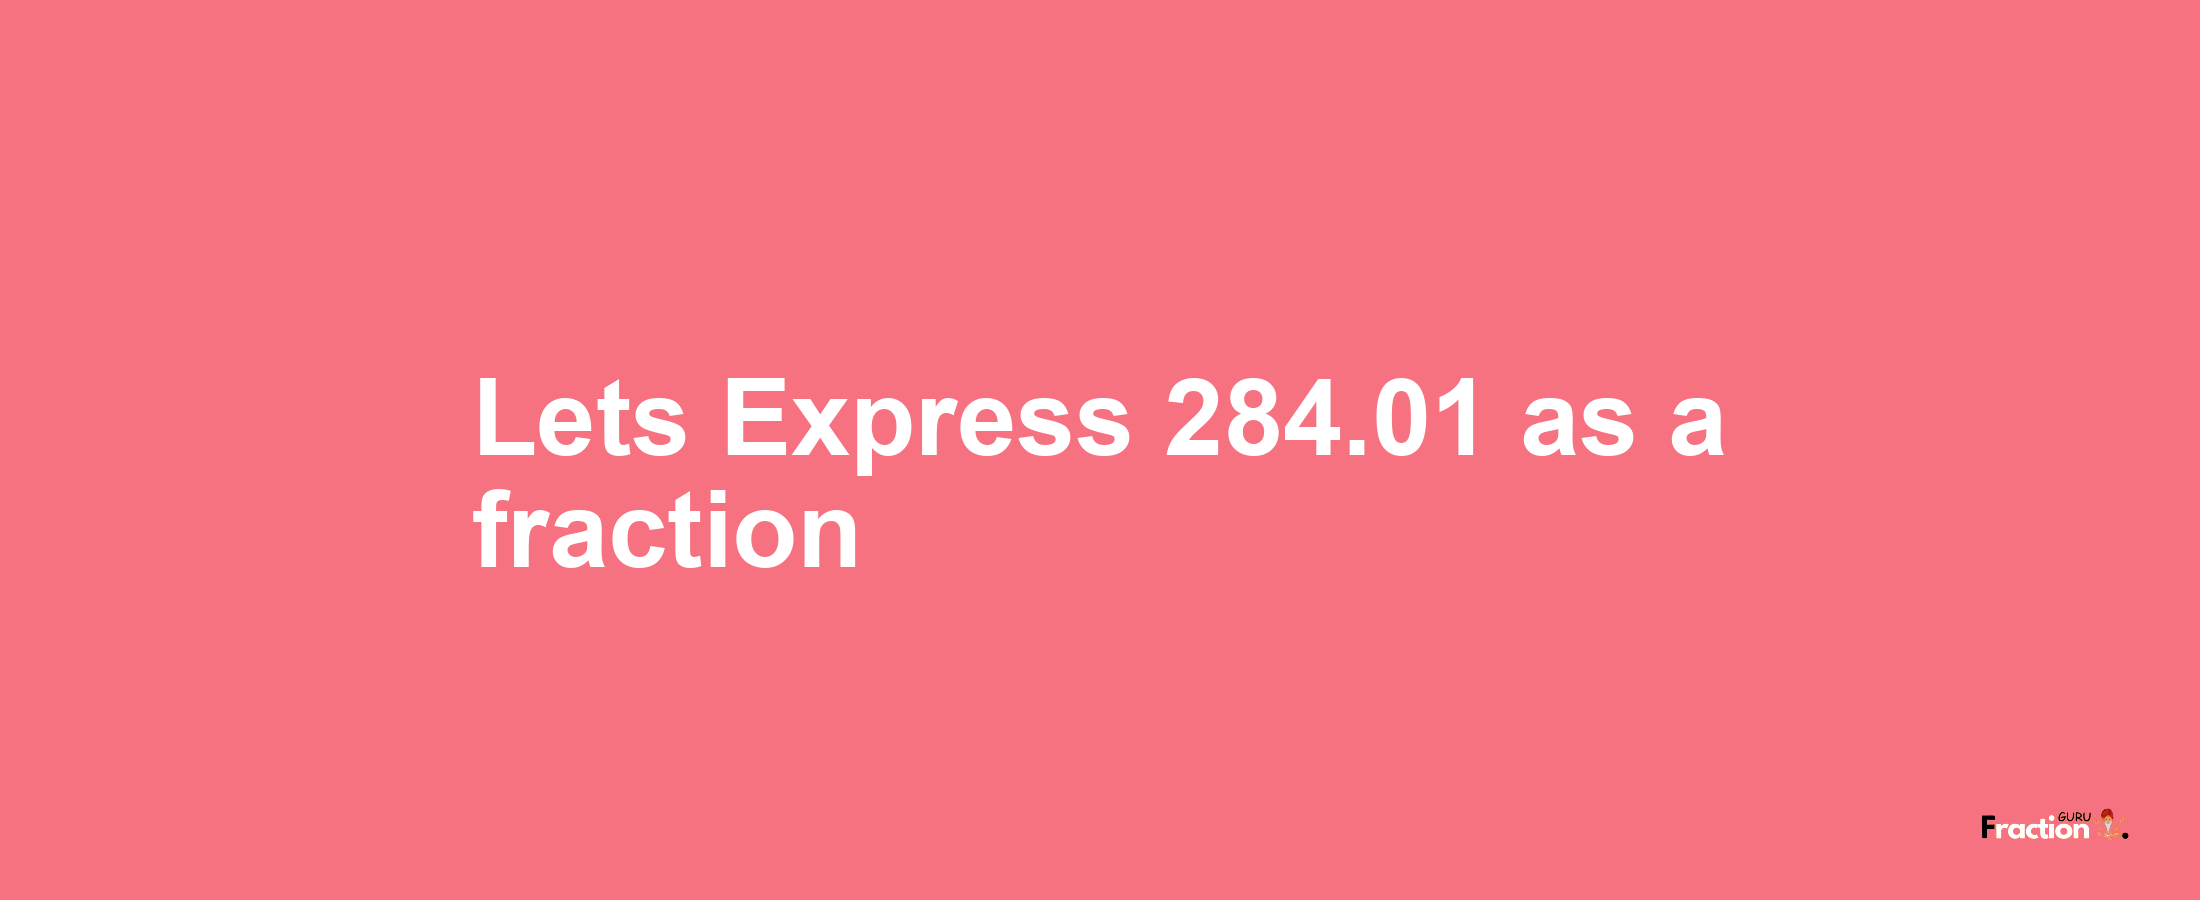 Lets Express 284.01 as afraction